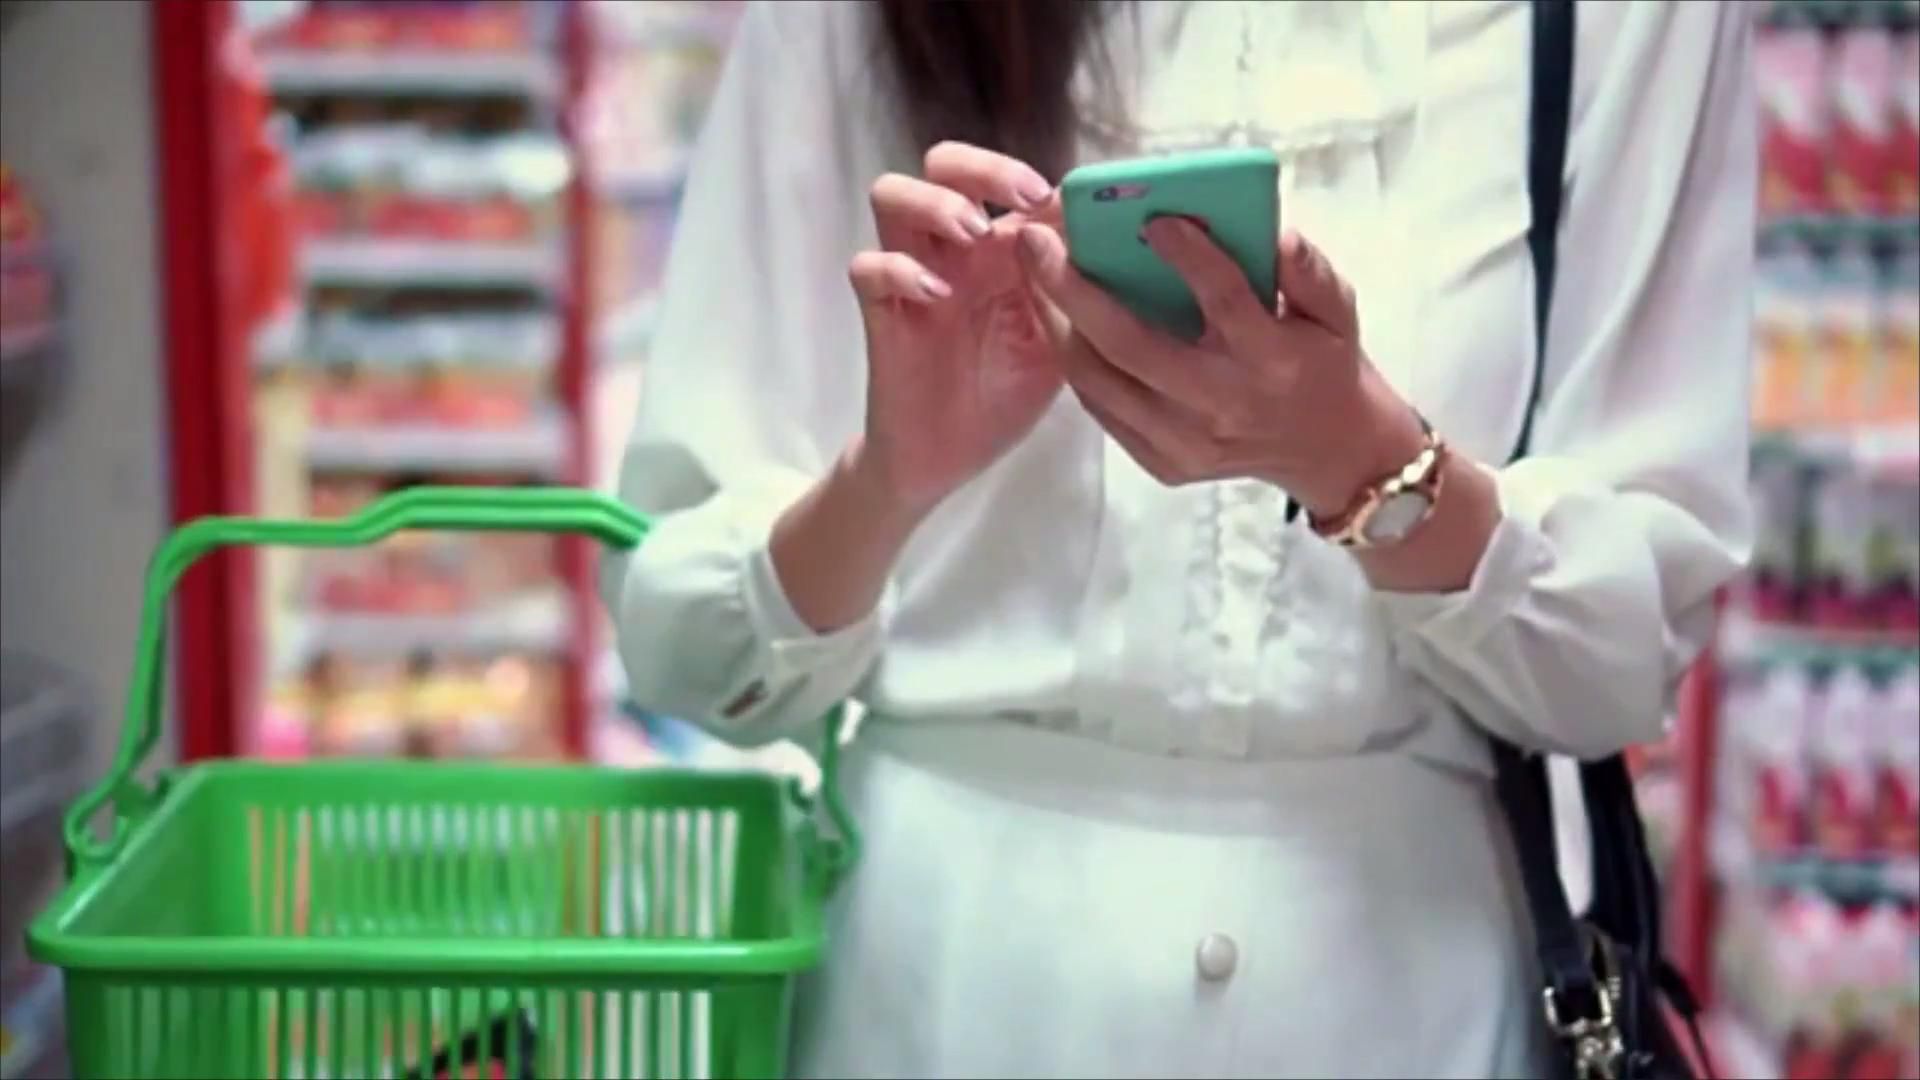 Woman Holding Phone Calculator with Market Basket at Store